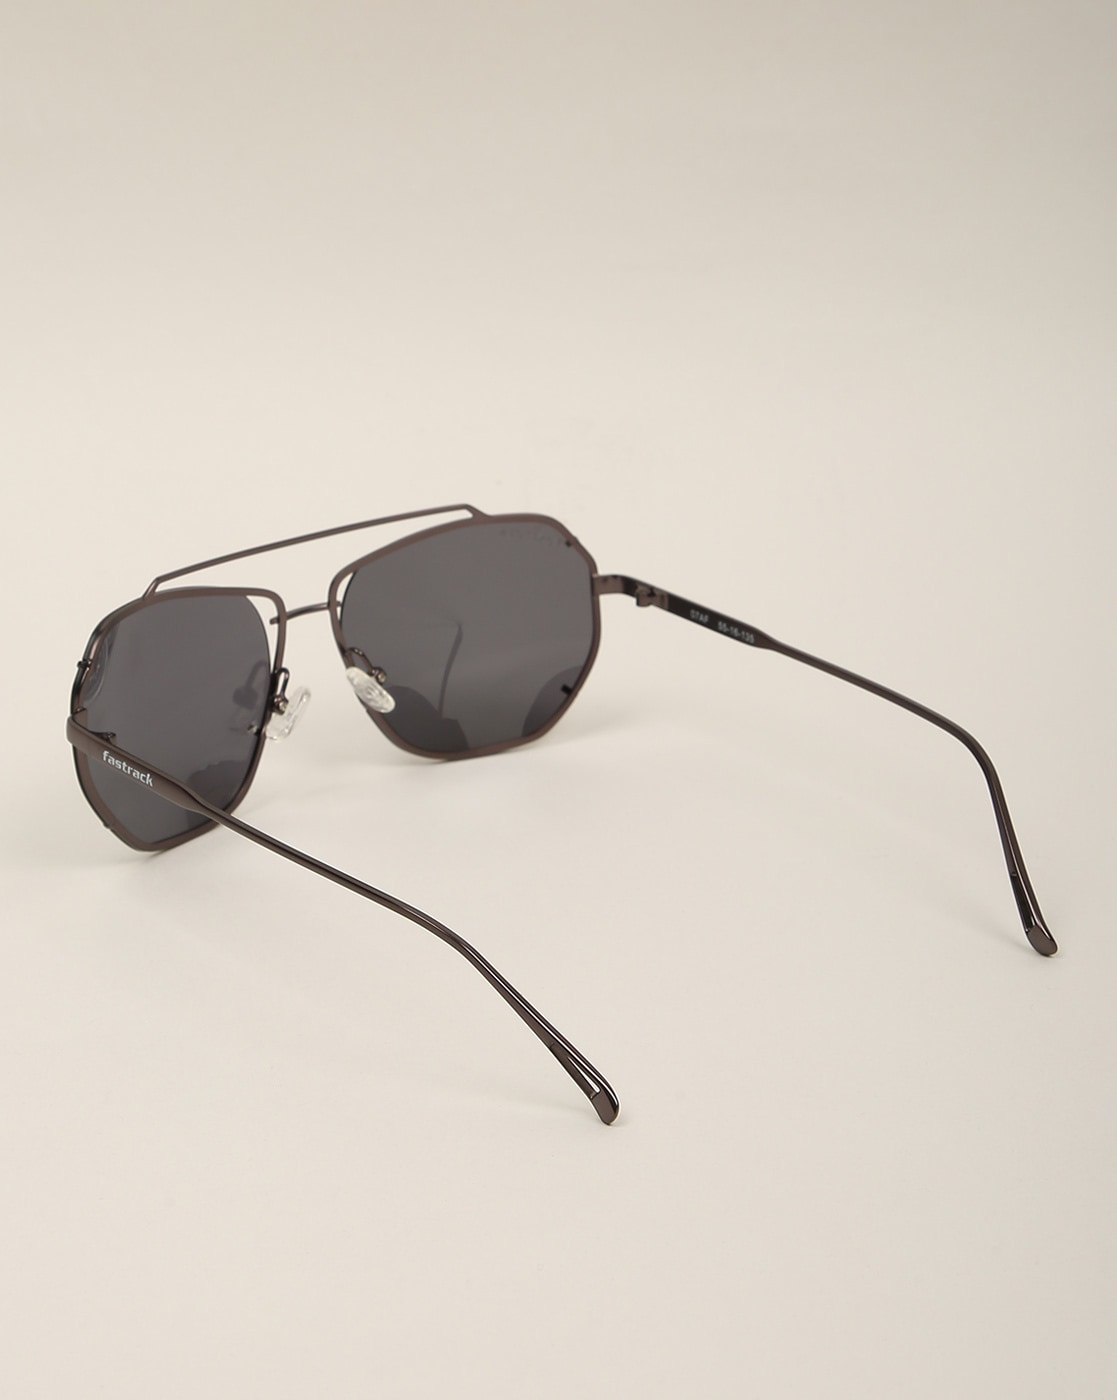 Classic Aviator Hybrid Acetate Frame Sunglasses with Real Wood Inlay &